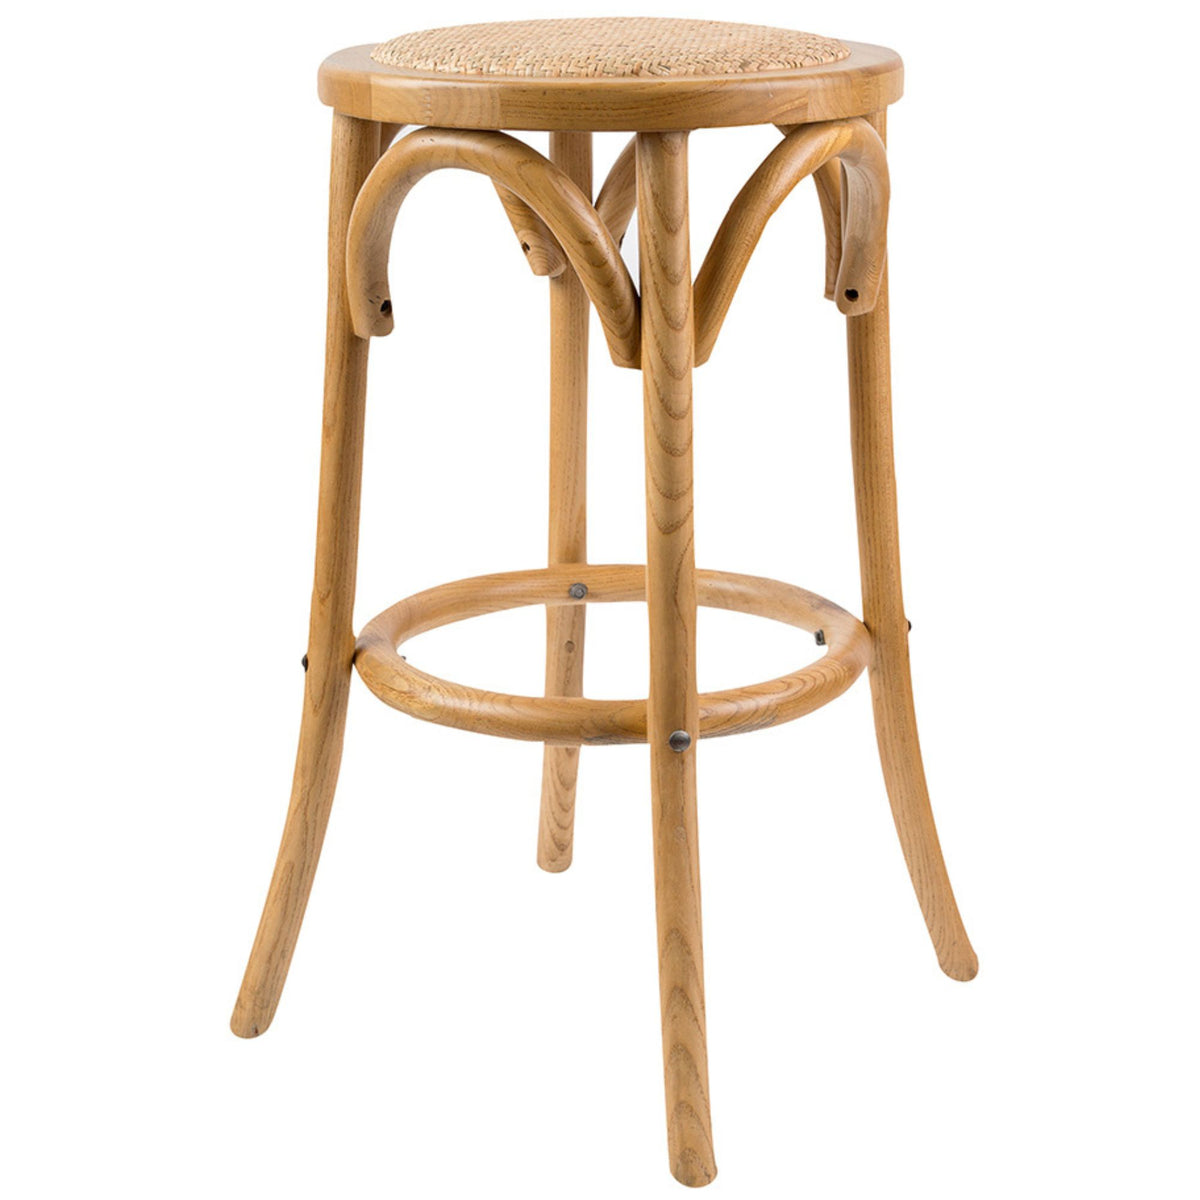 Aster Round Rattan Dining Solid Timber Bar Stools - Oak